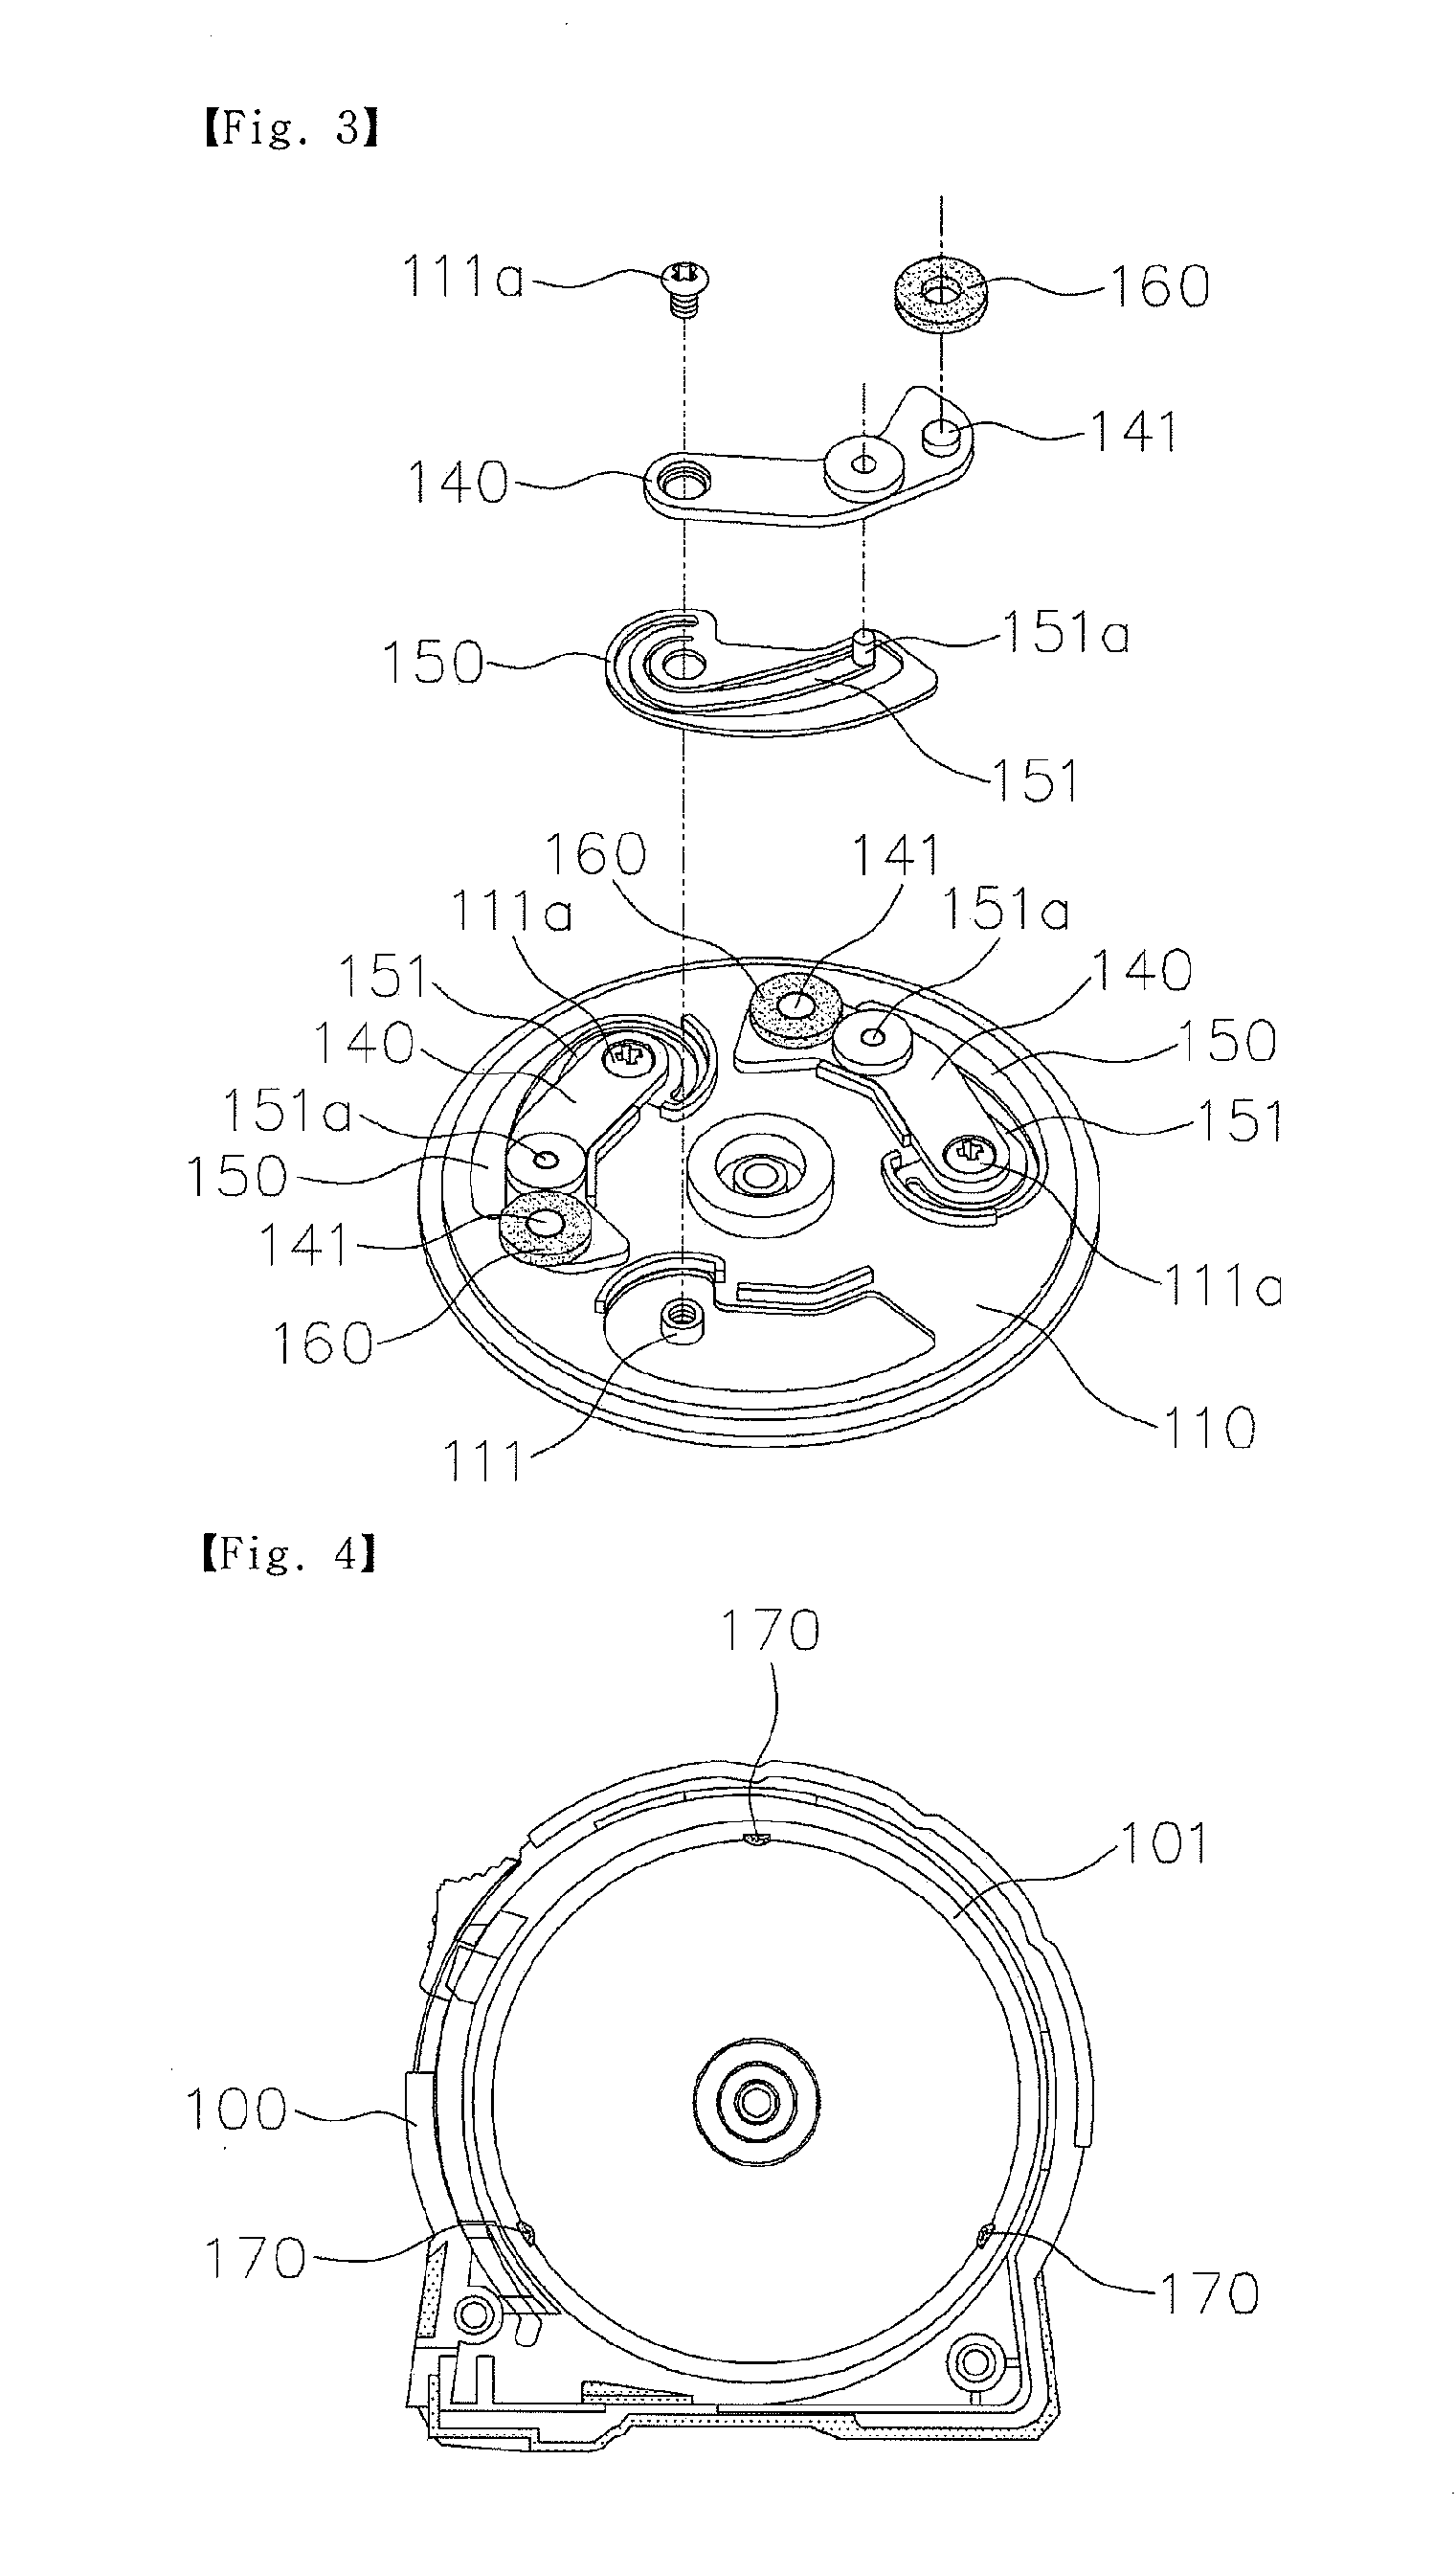 Tape measure with self-regulating speed control mechanism